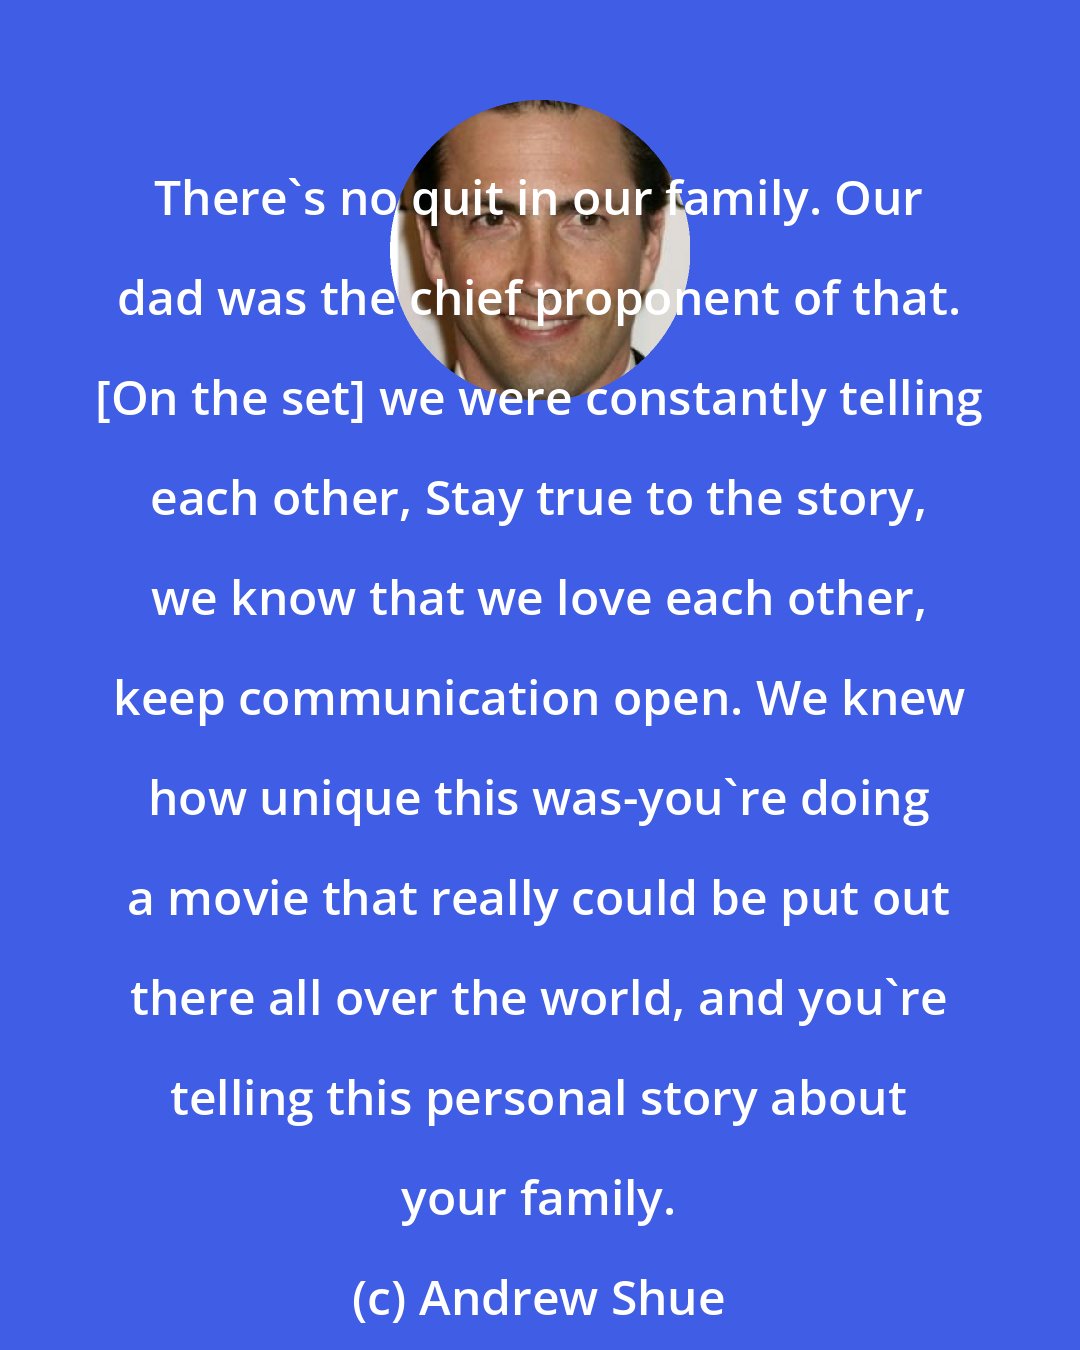 Andrew Shue: There's no quit in our family. Our dad was the chief proponent of that. [On the set] we were constantly telling each other, Stay true to the story, we know that we love each other, keep communication open. We knew how unique this was-you're doing a movie that really could be put out there all over the world, and you're telling this personal story about your family.